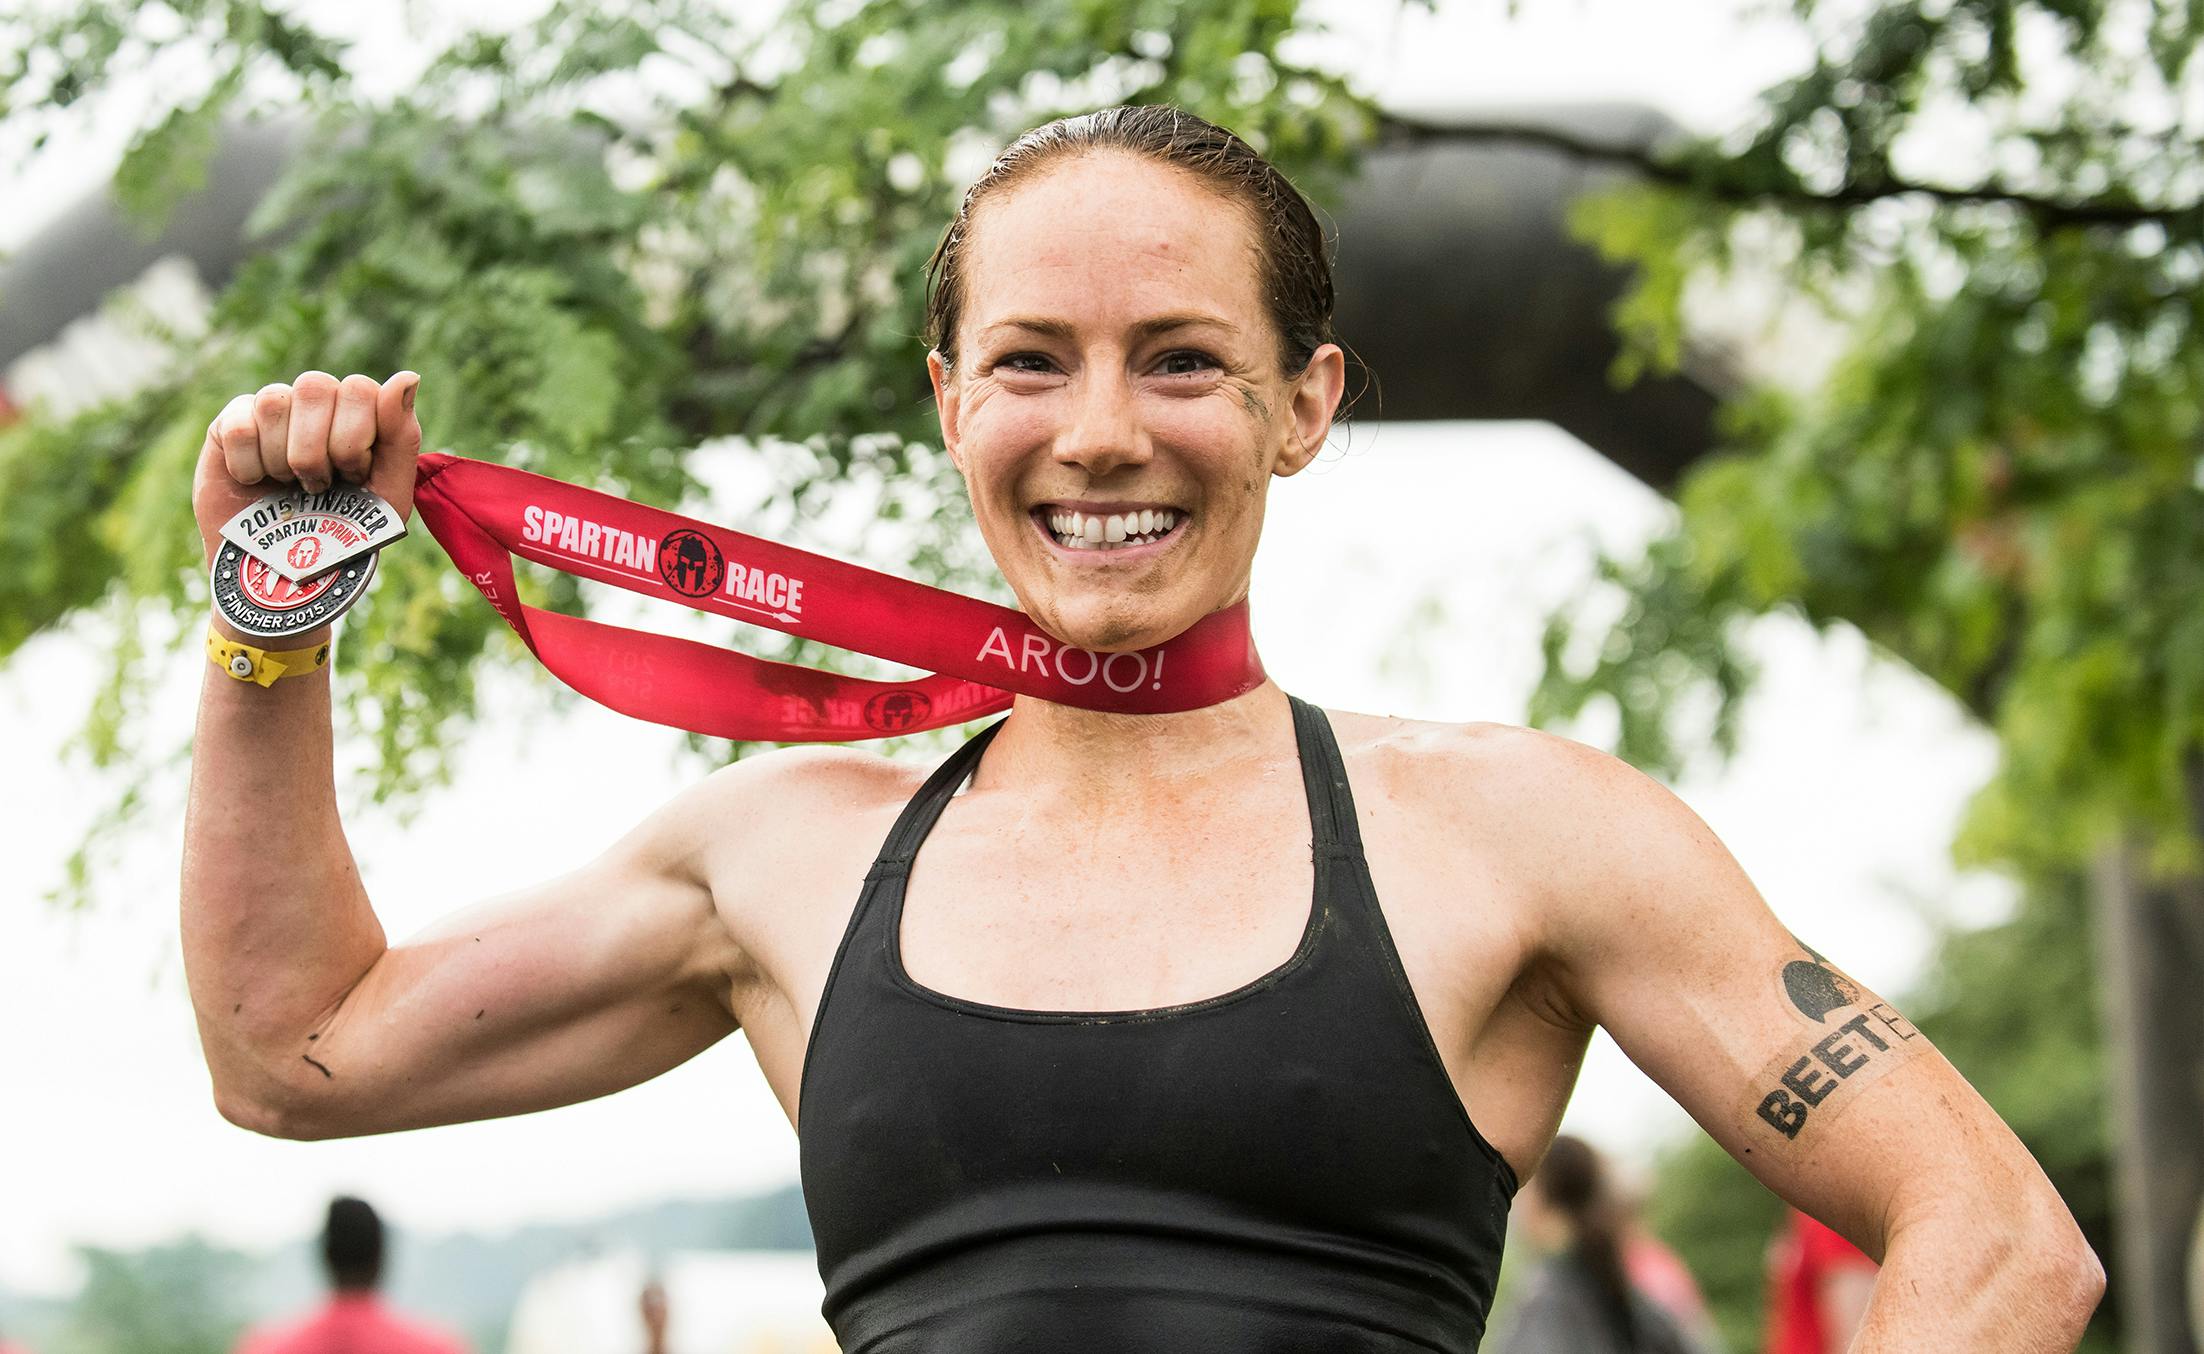 Rose Wetzel, a Spartan obstacle course racer, smiling and holding her medal